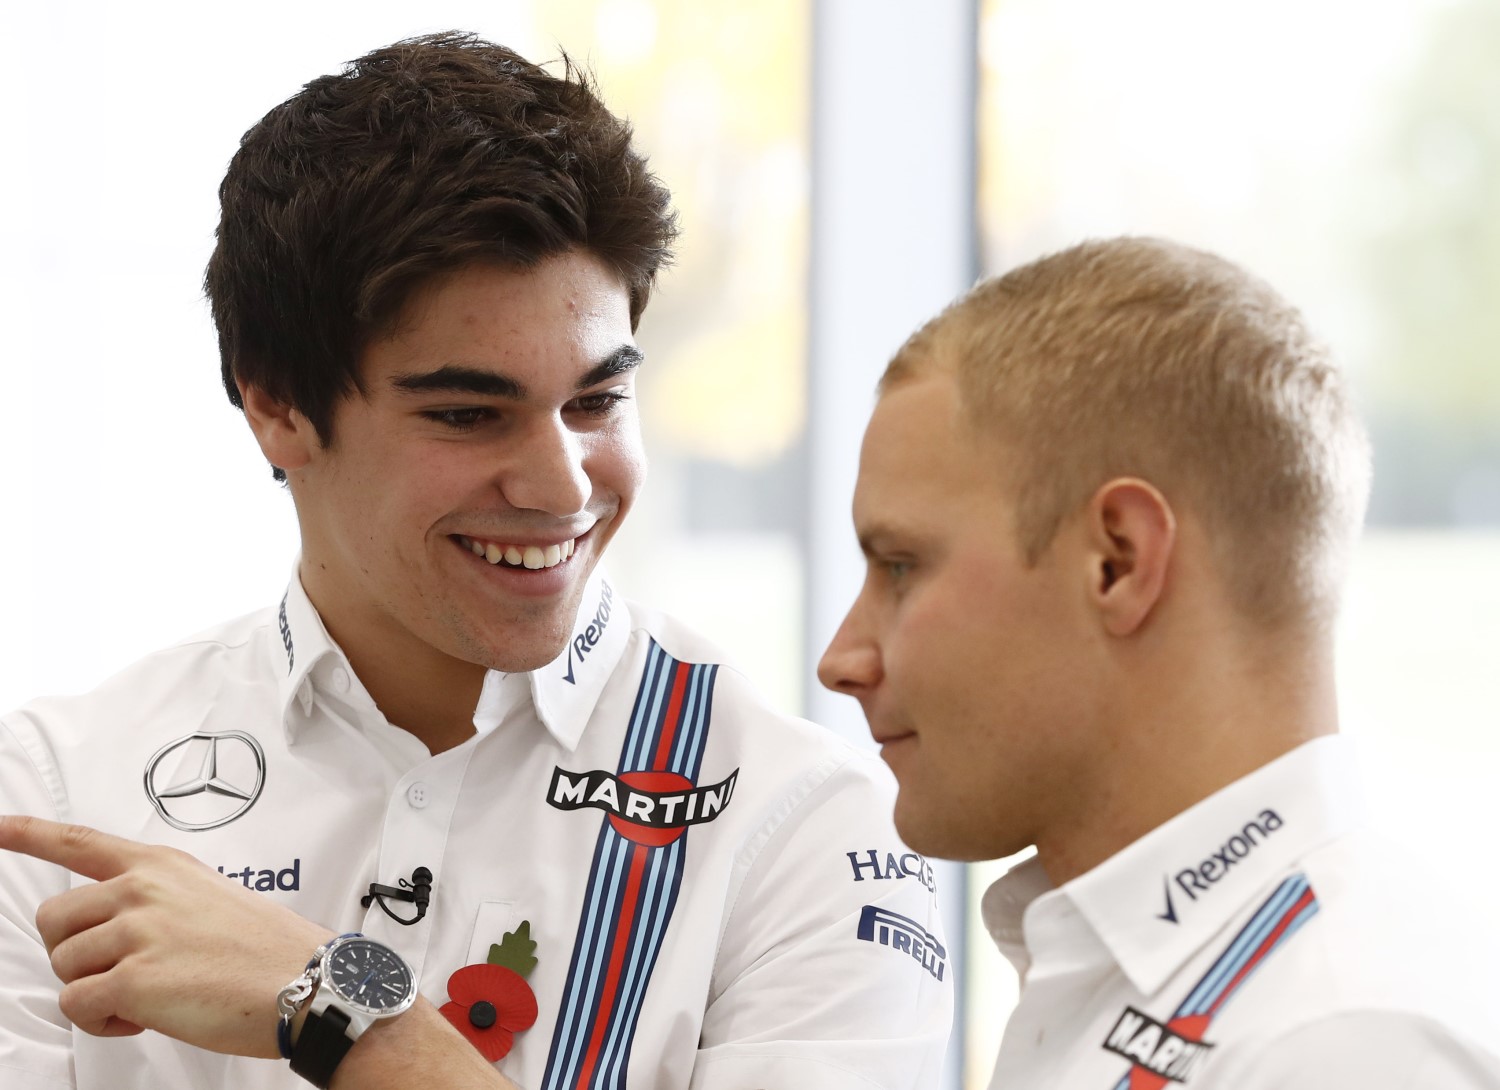 Lance Stroll (L) - His dad bought half the team so his son could drive